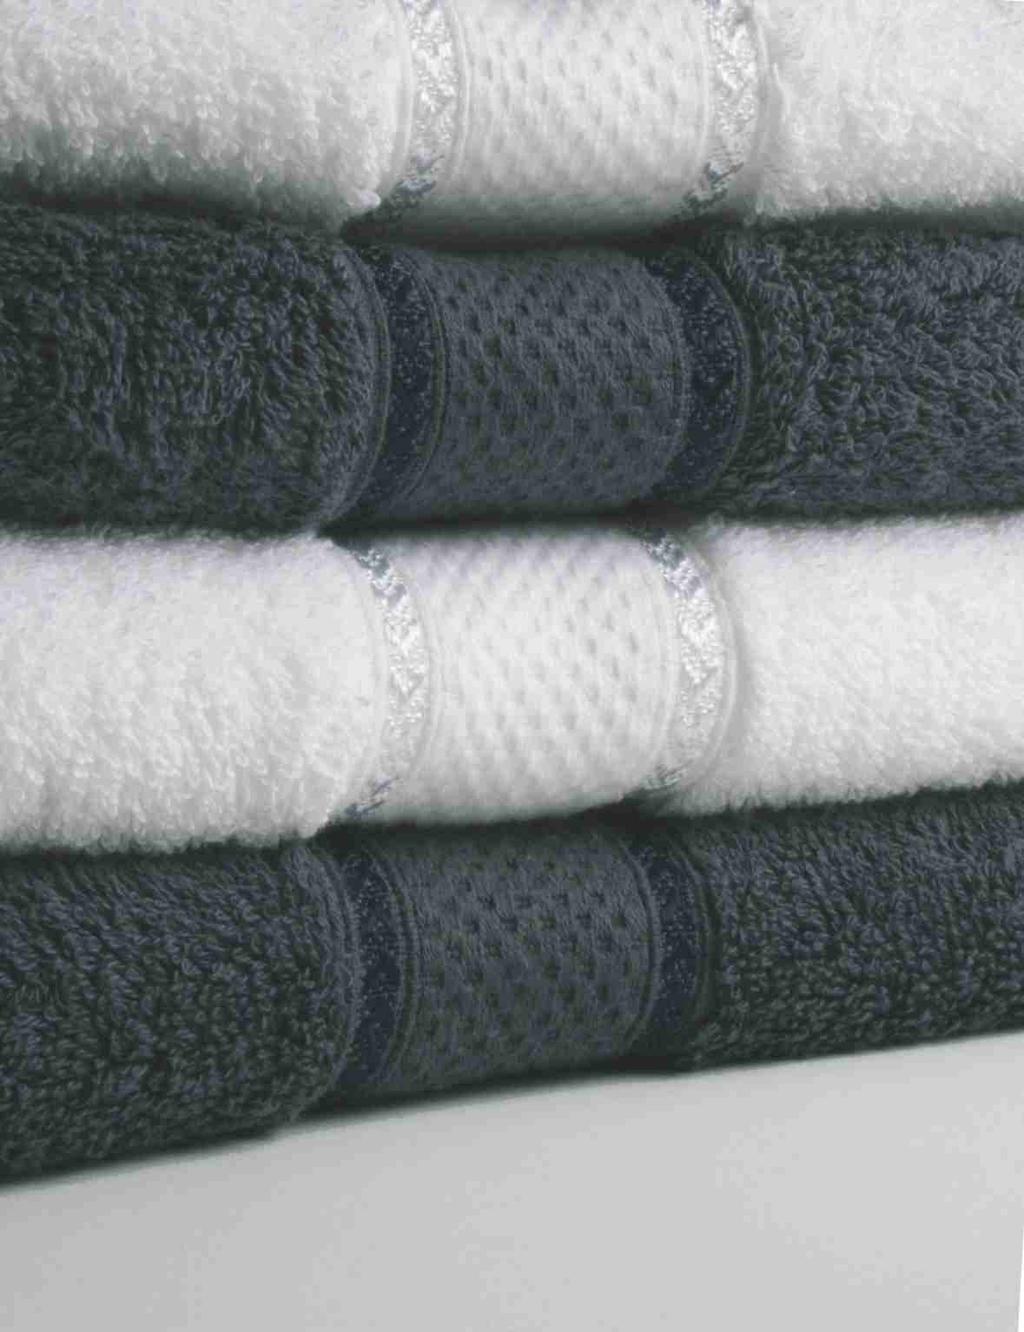 Sara is the third largest producer of terry towels in India and exports its products to Europe, USA, Australia and the Middle East.